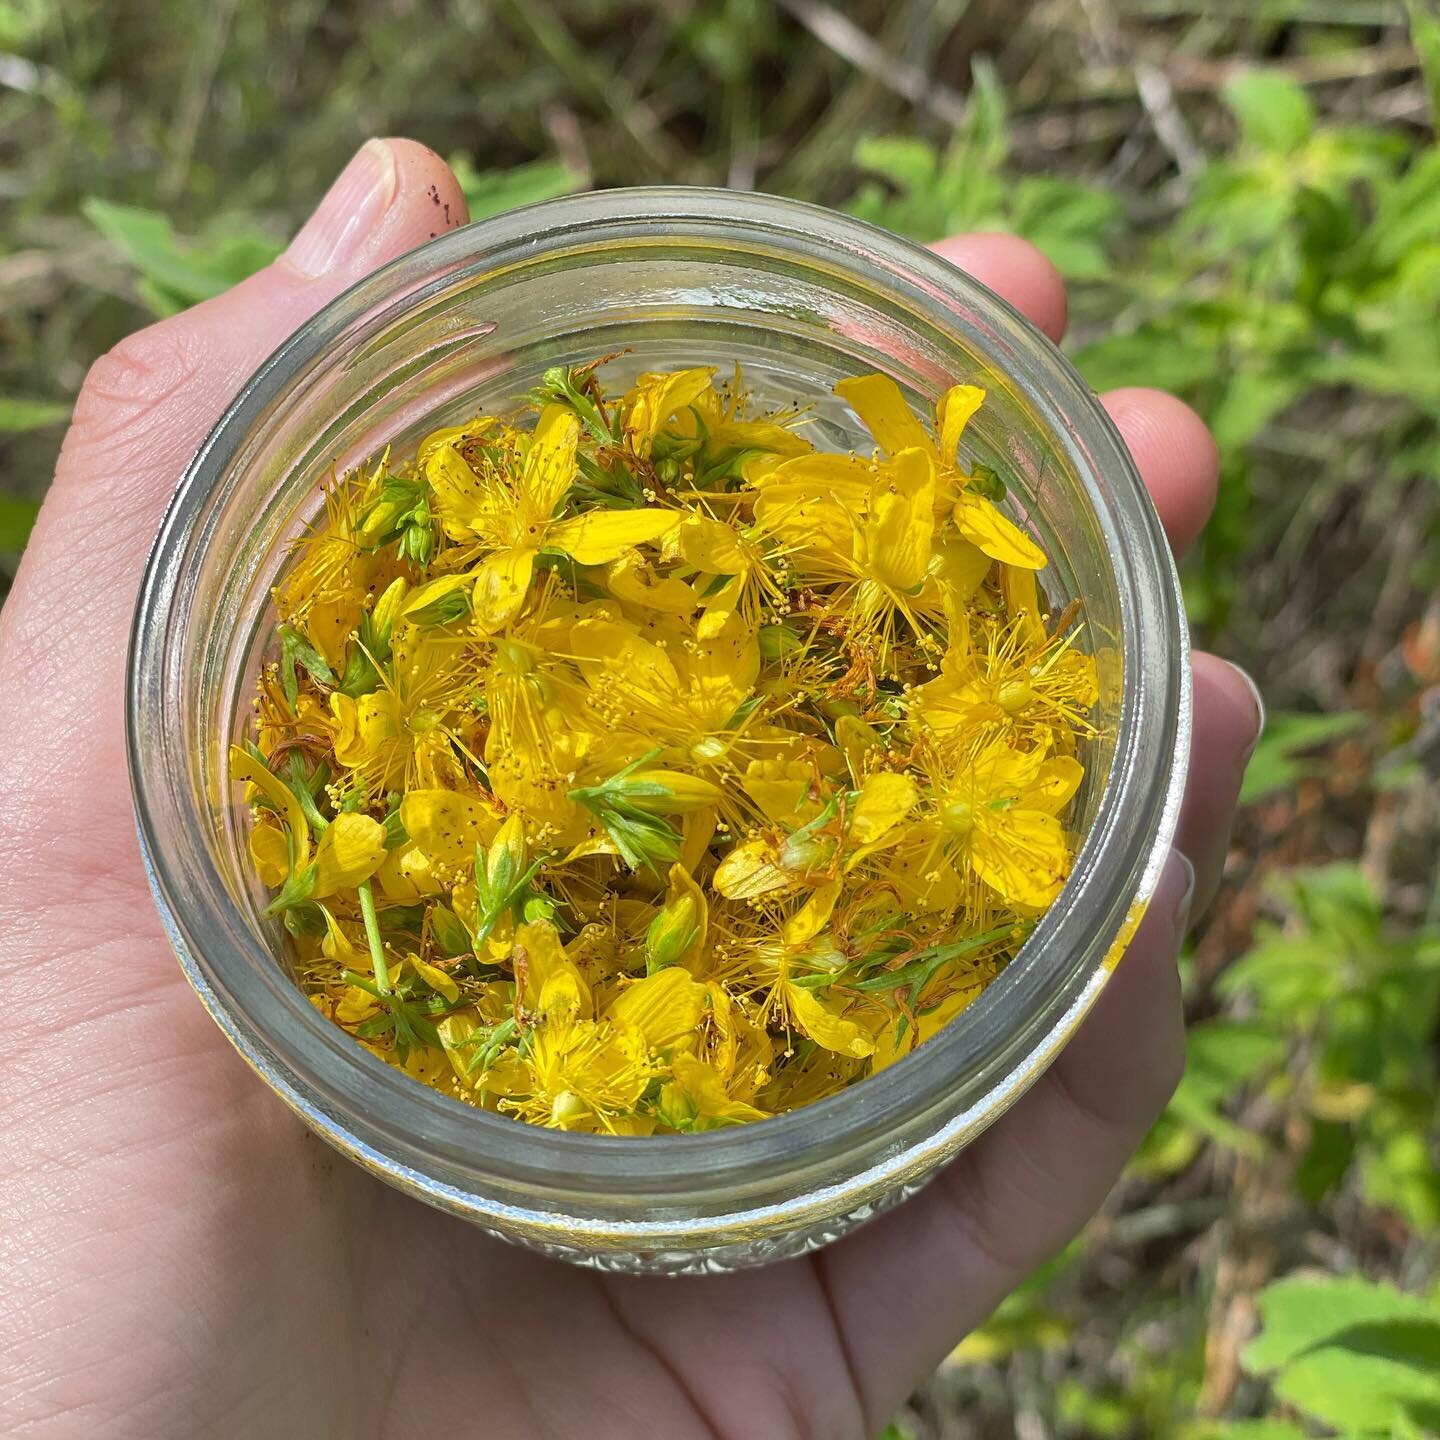 Harvesting St. John&rsquo;s Wart (Hypericum perforatum)!
✨Benefits✨
🌱Anti-depressant qualities
🌱Relieves anxiety
🌱Reduces Mood Swings
🌱Eases withdrawal symptoms
🌱Antiviral agent 
🌱Restores hormonal balance 
🌱Anti-inflammatory 
🌱Skincare to tr